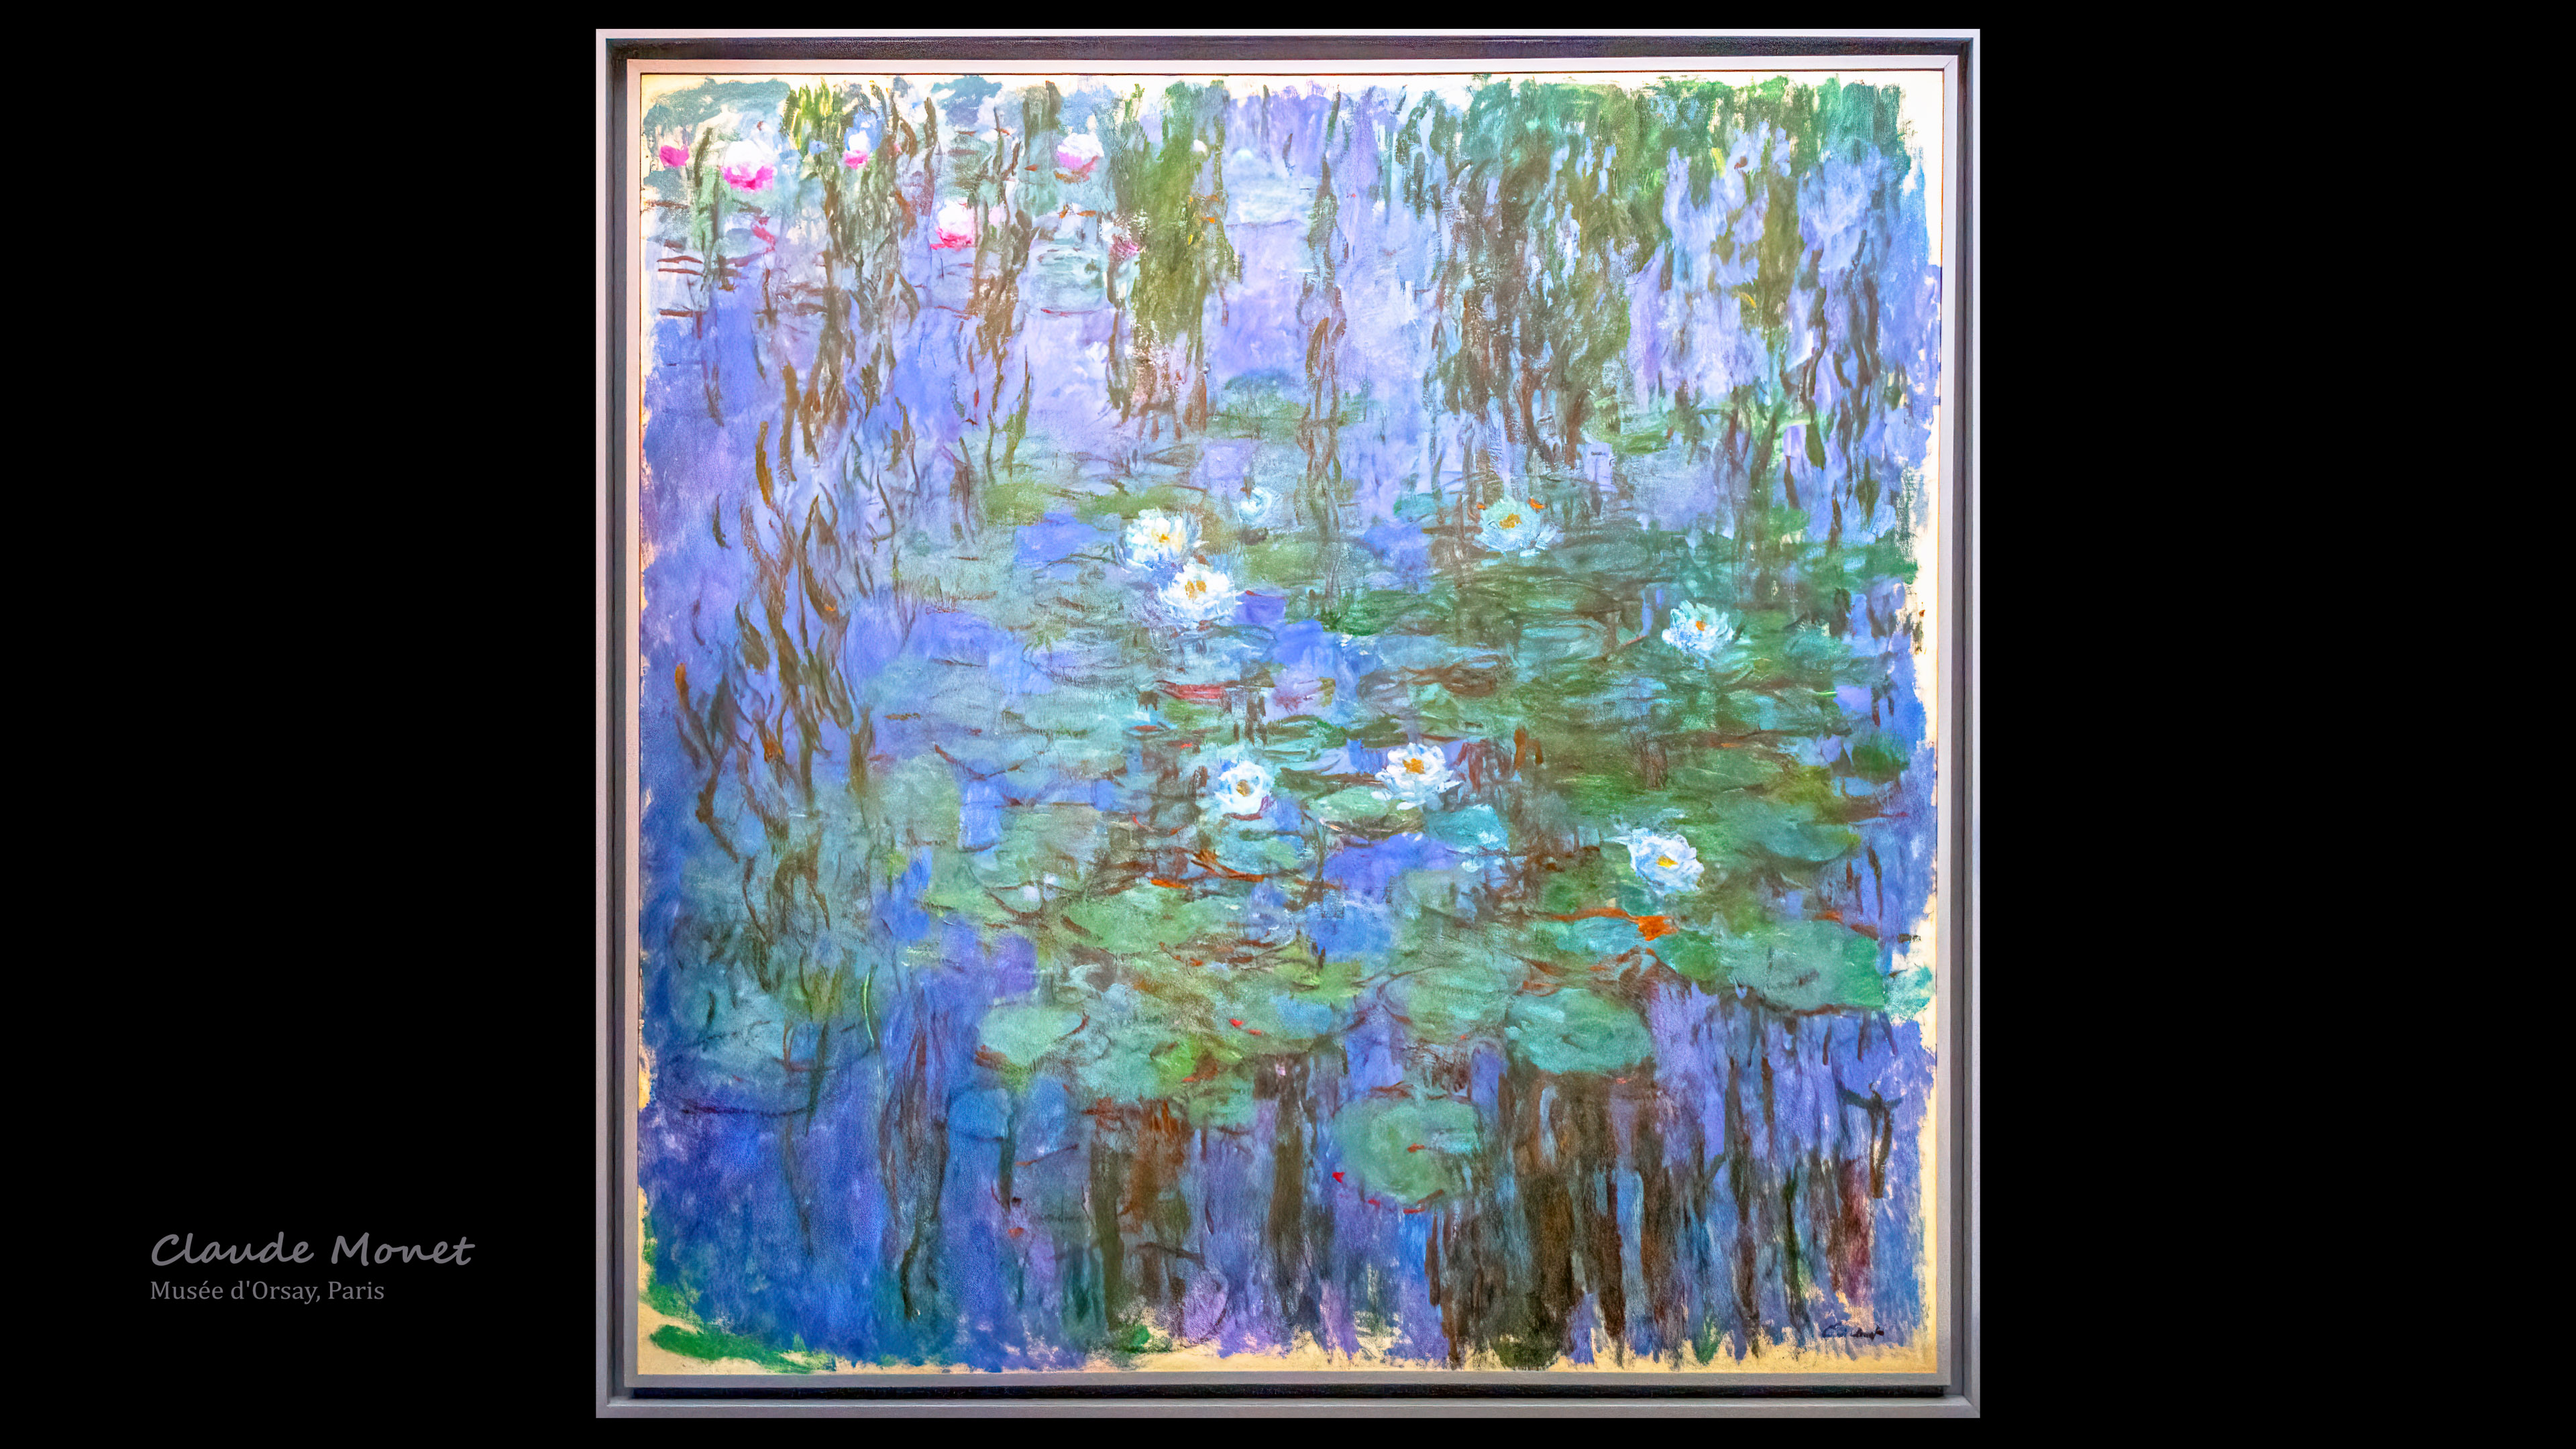 Capture the essence of Monet's masterpieces with our mesmerizing 4k Monet Water Lilies wallpaper.